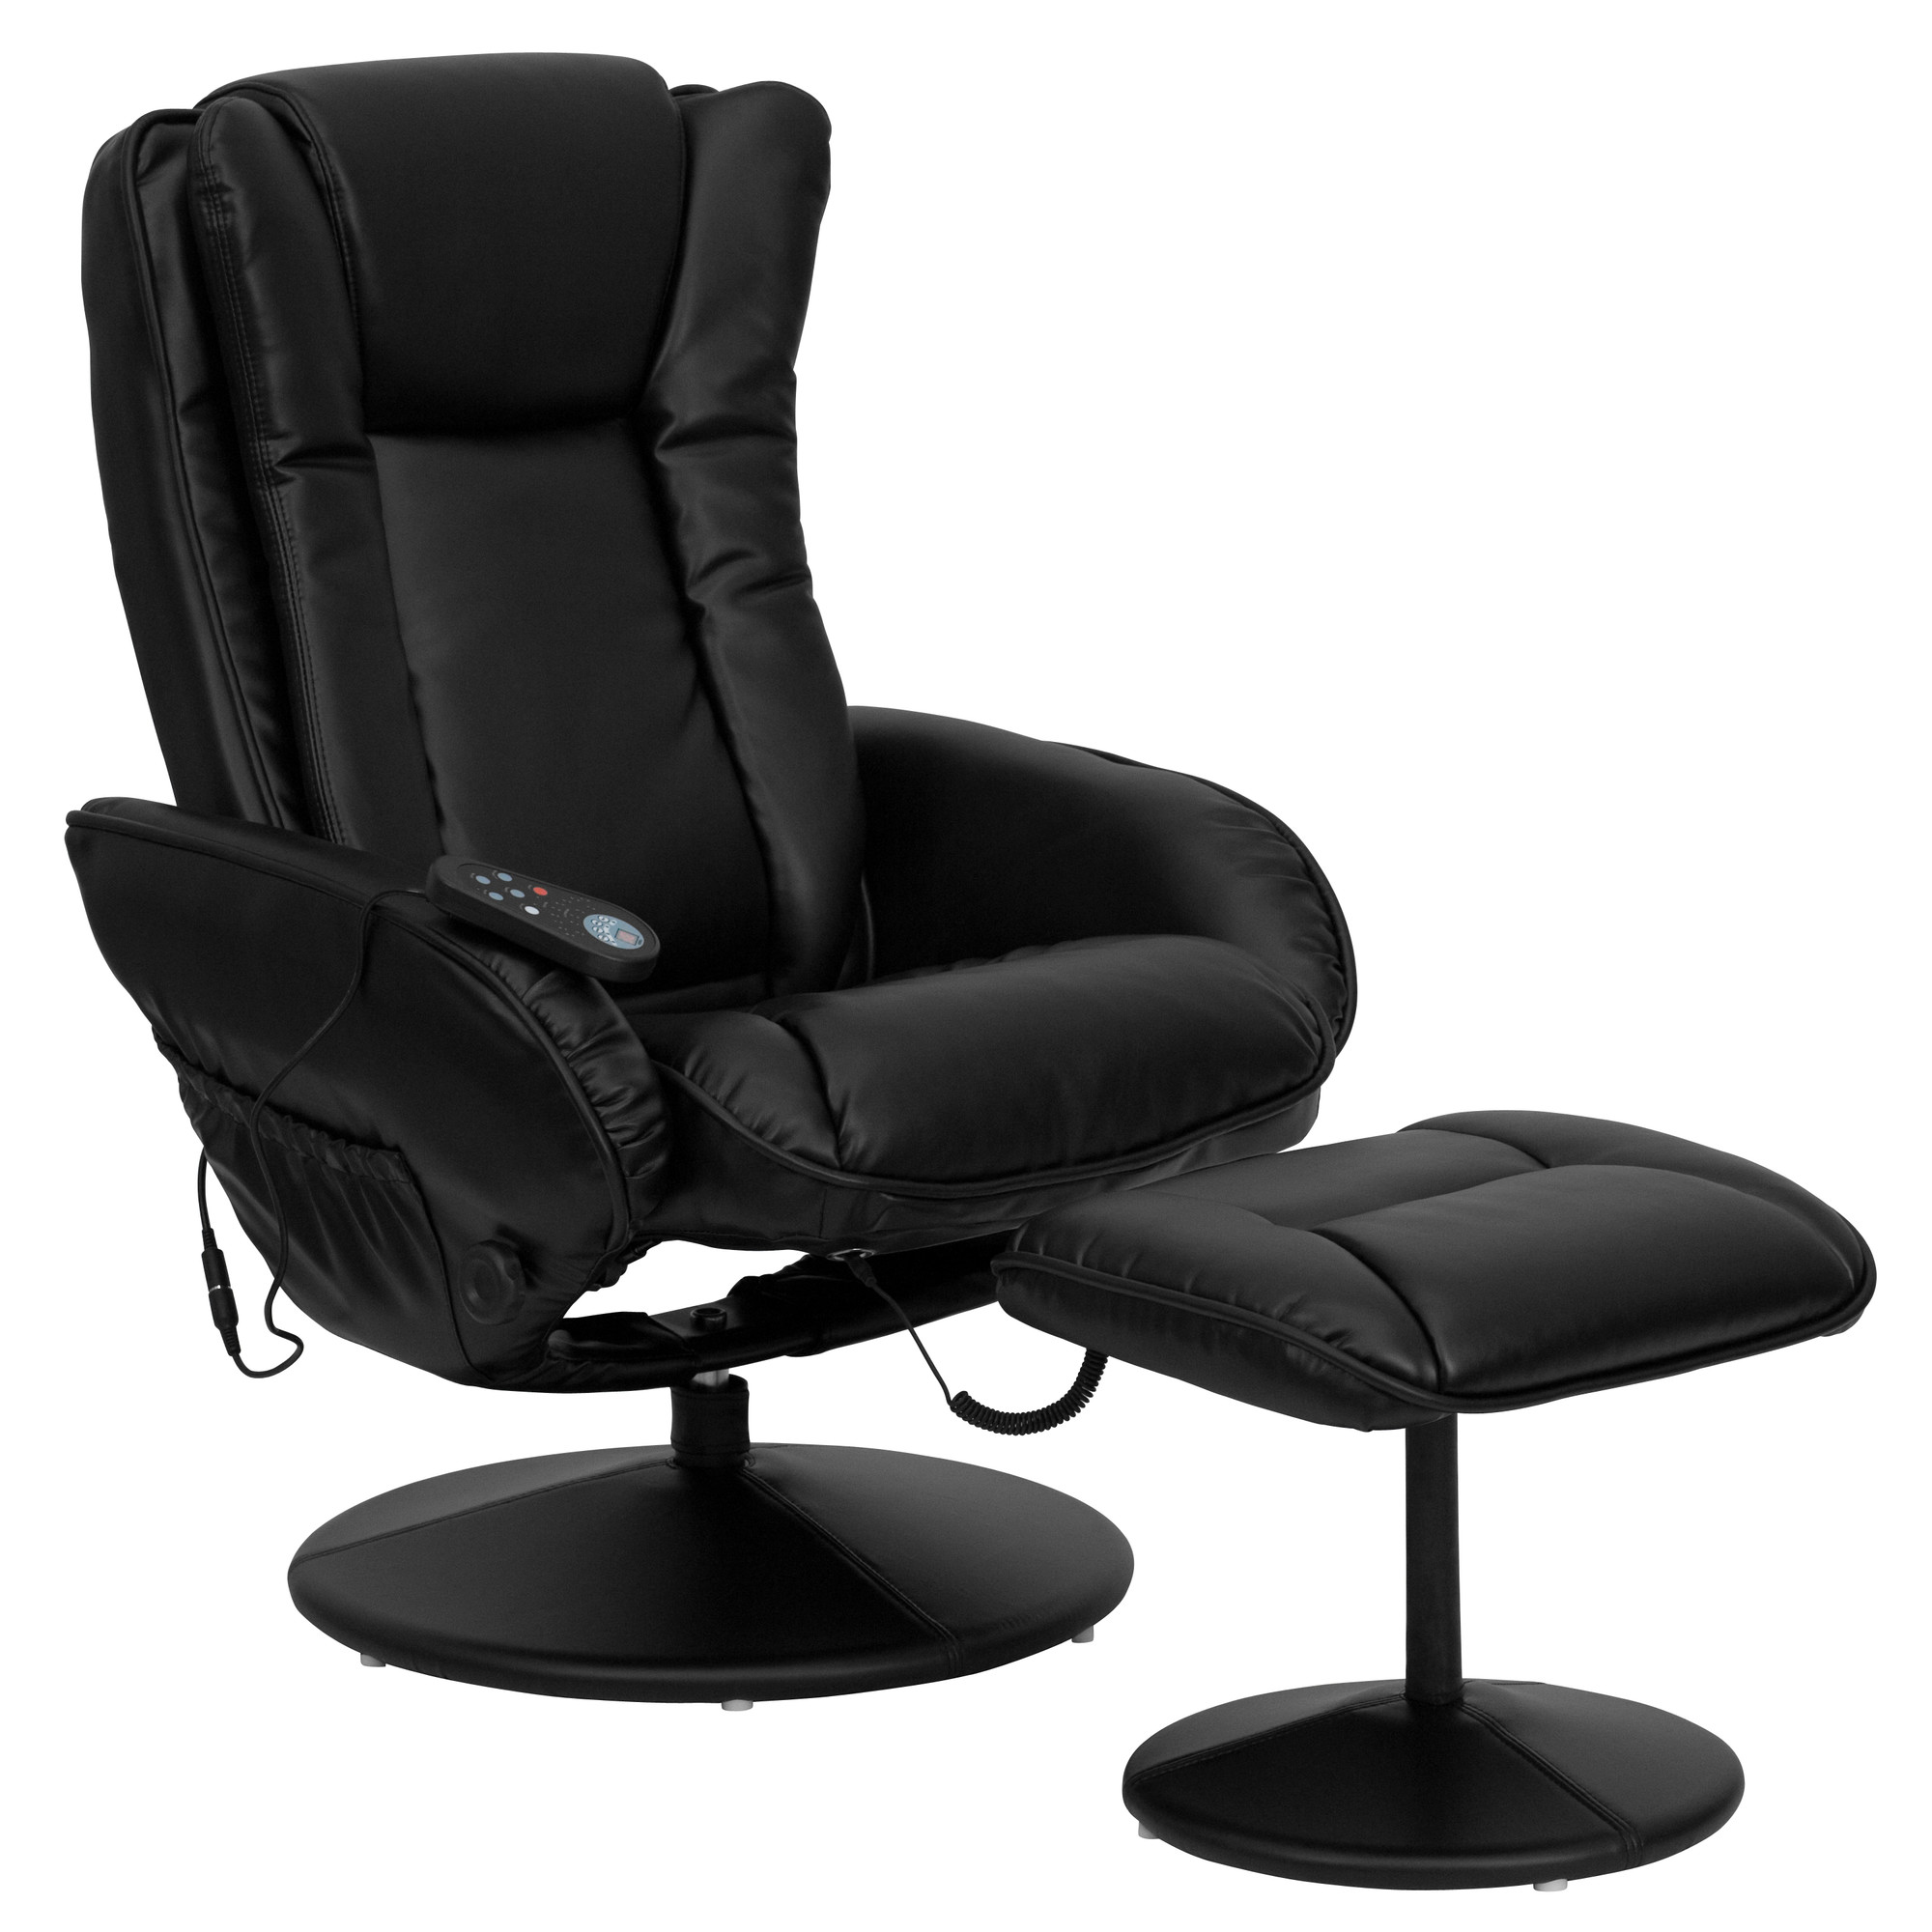 reclining chair with ottoman